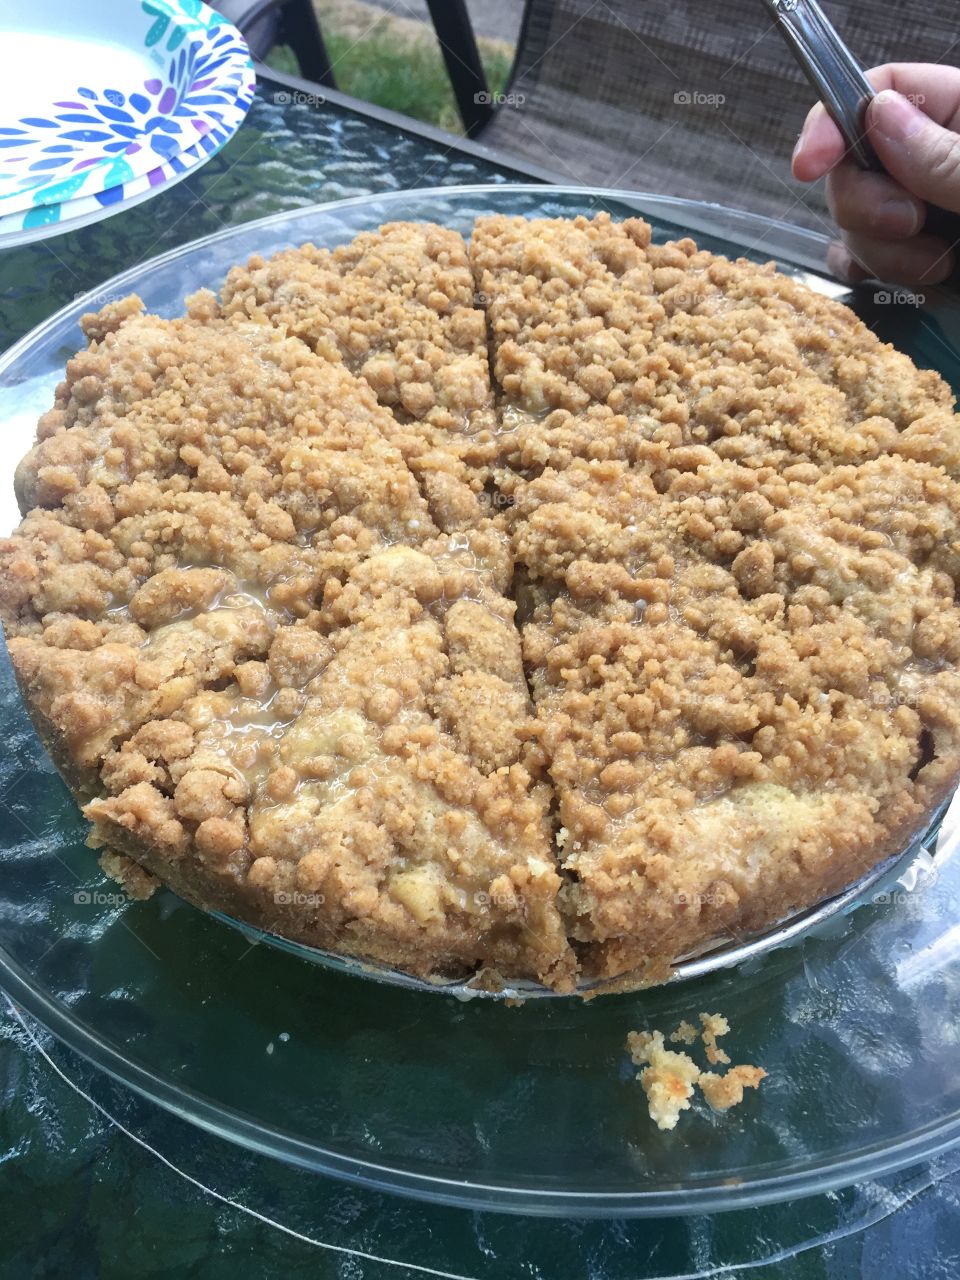 Homemade crumble crust top pie. Who is wanting a slice of yummy dessert and glass of milk?